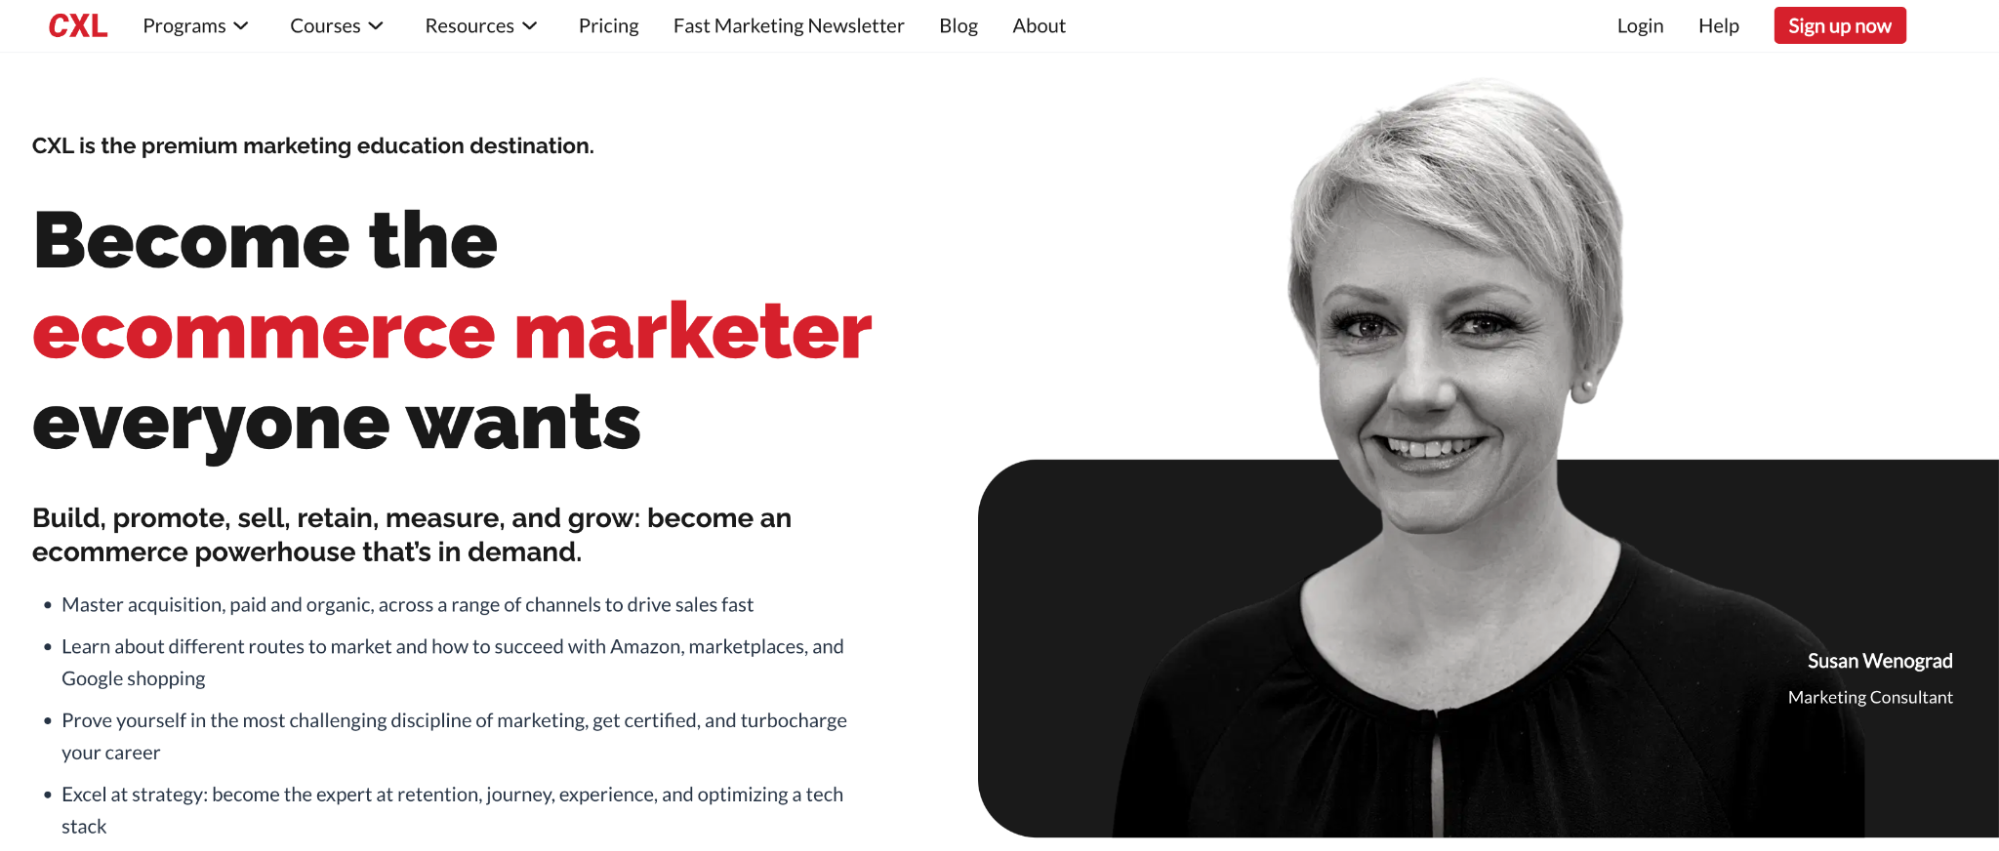 Become the ecommerce marketer everyone wants. Headshot of Marketing Consultant Susan Wenograd.